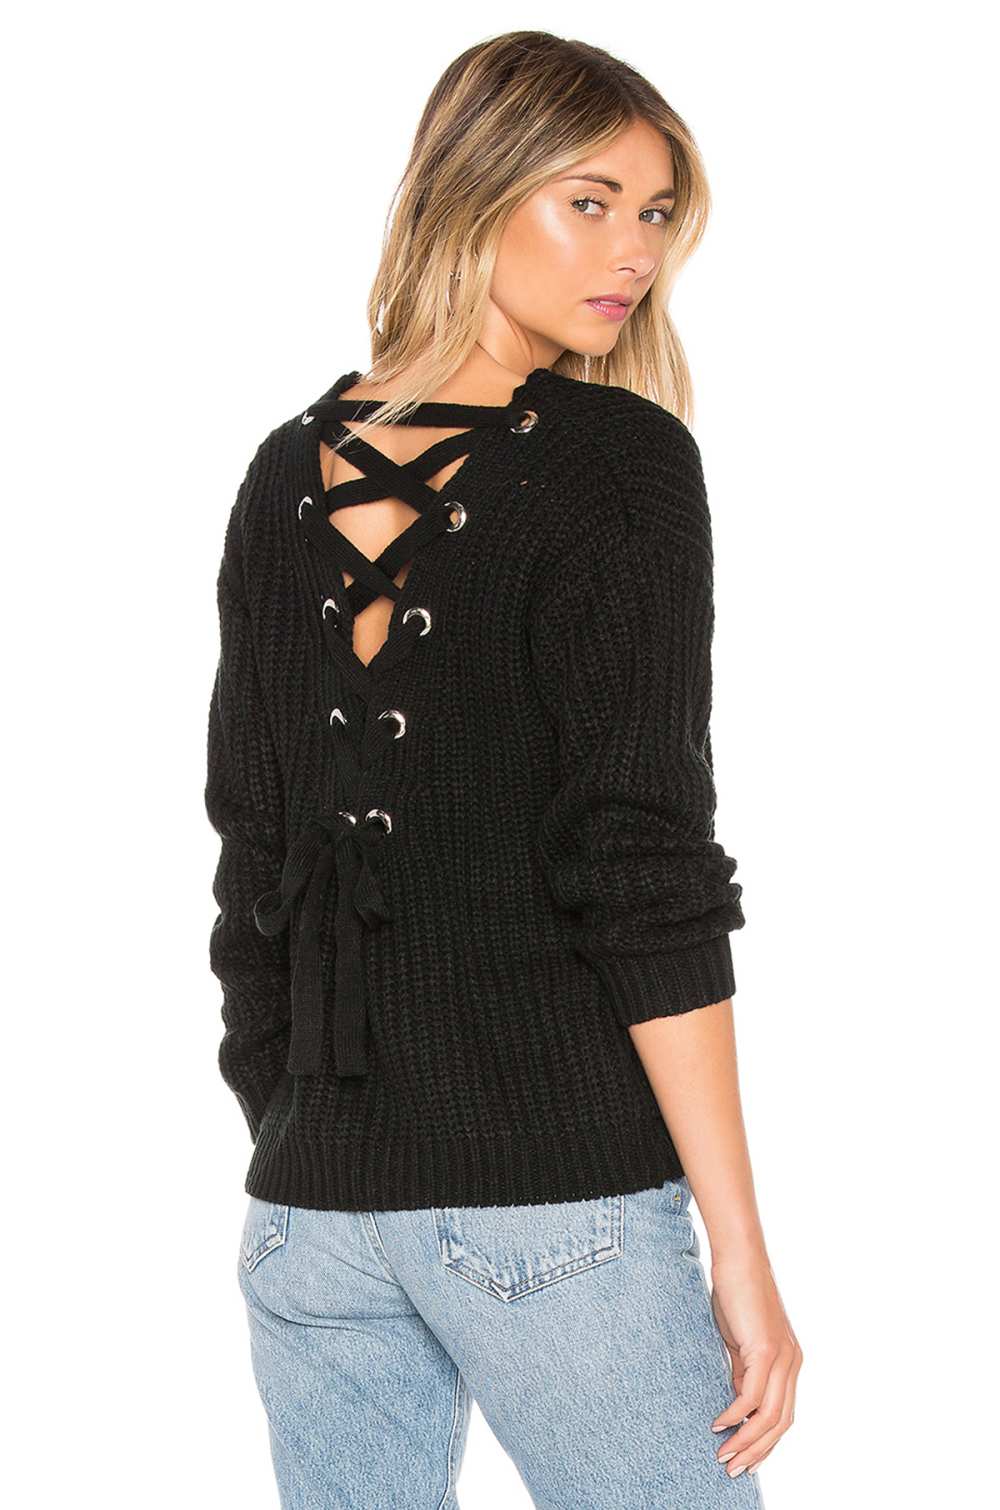 lace-up-sweater-revolve